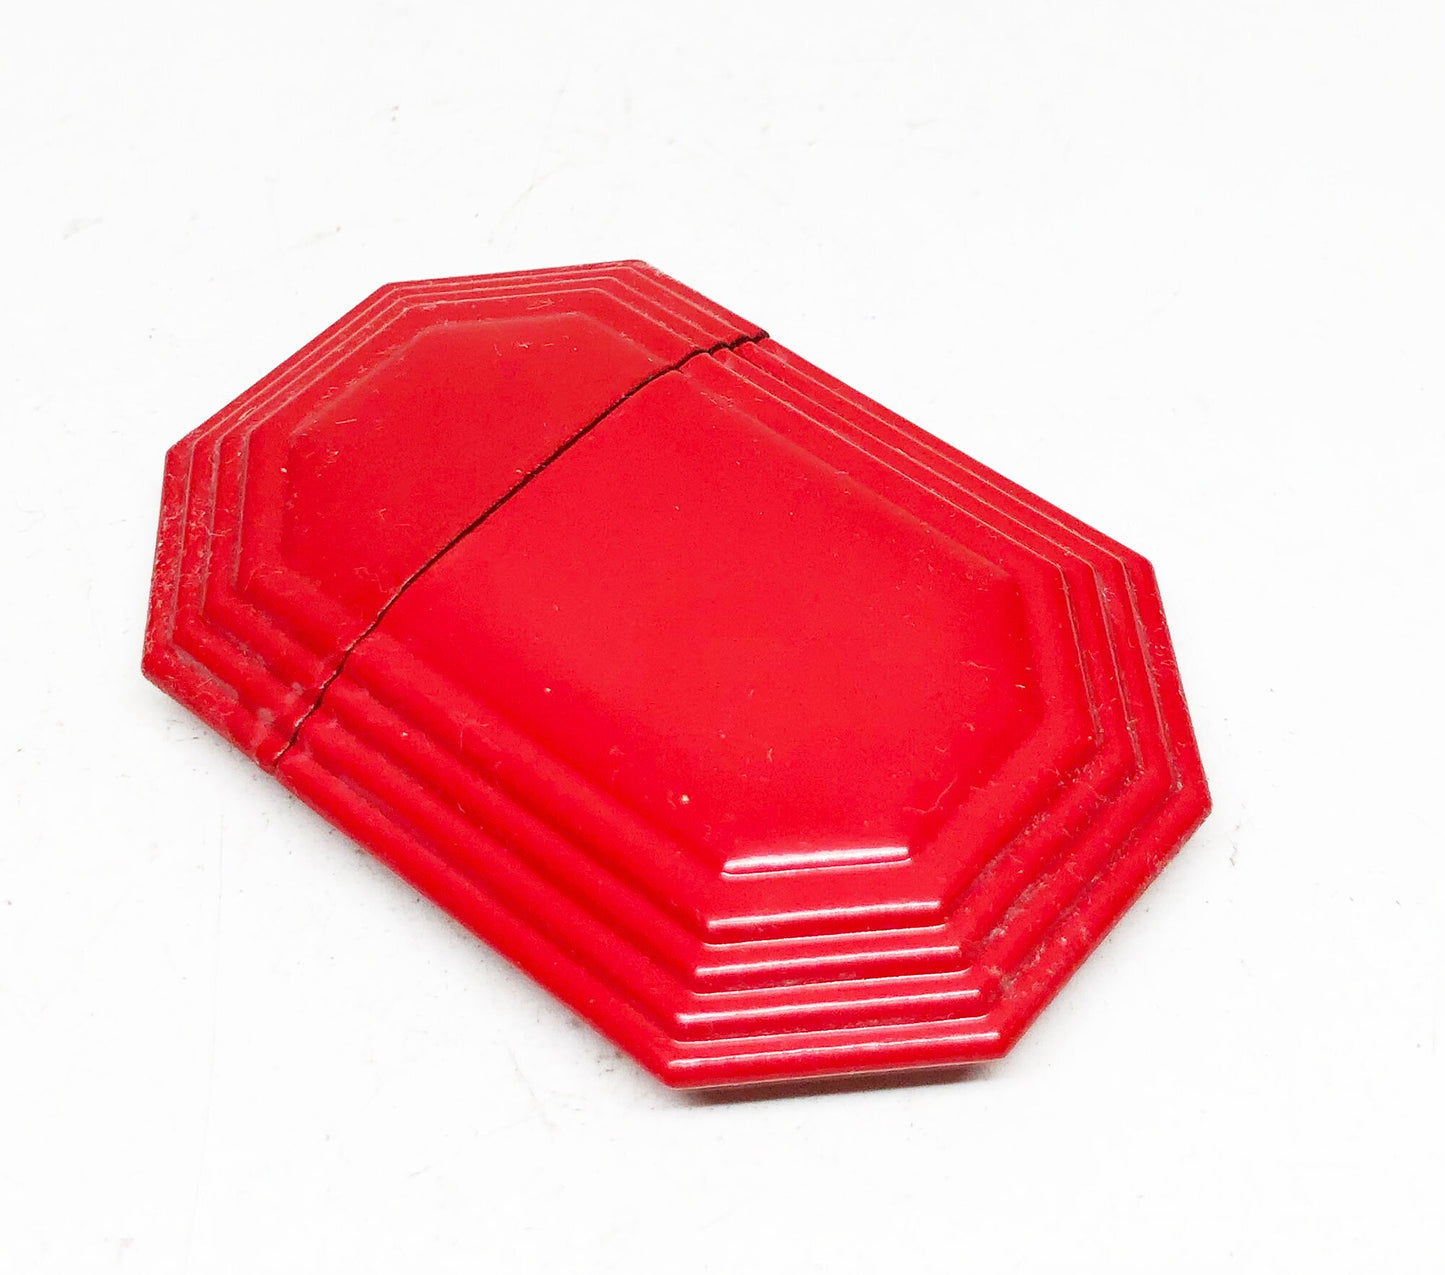 Working Eagle Red Octagonal Lighter - Vintage 1930's Trench Style Blue Steel Sleeve Lighter in Original Box - Made in USA